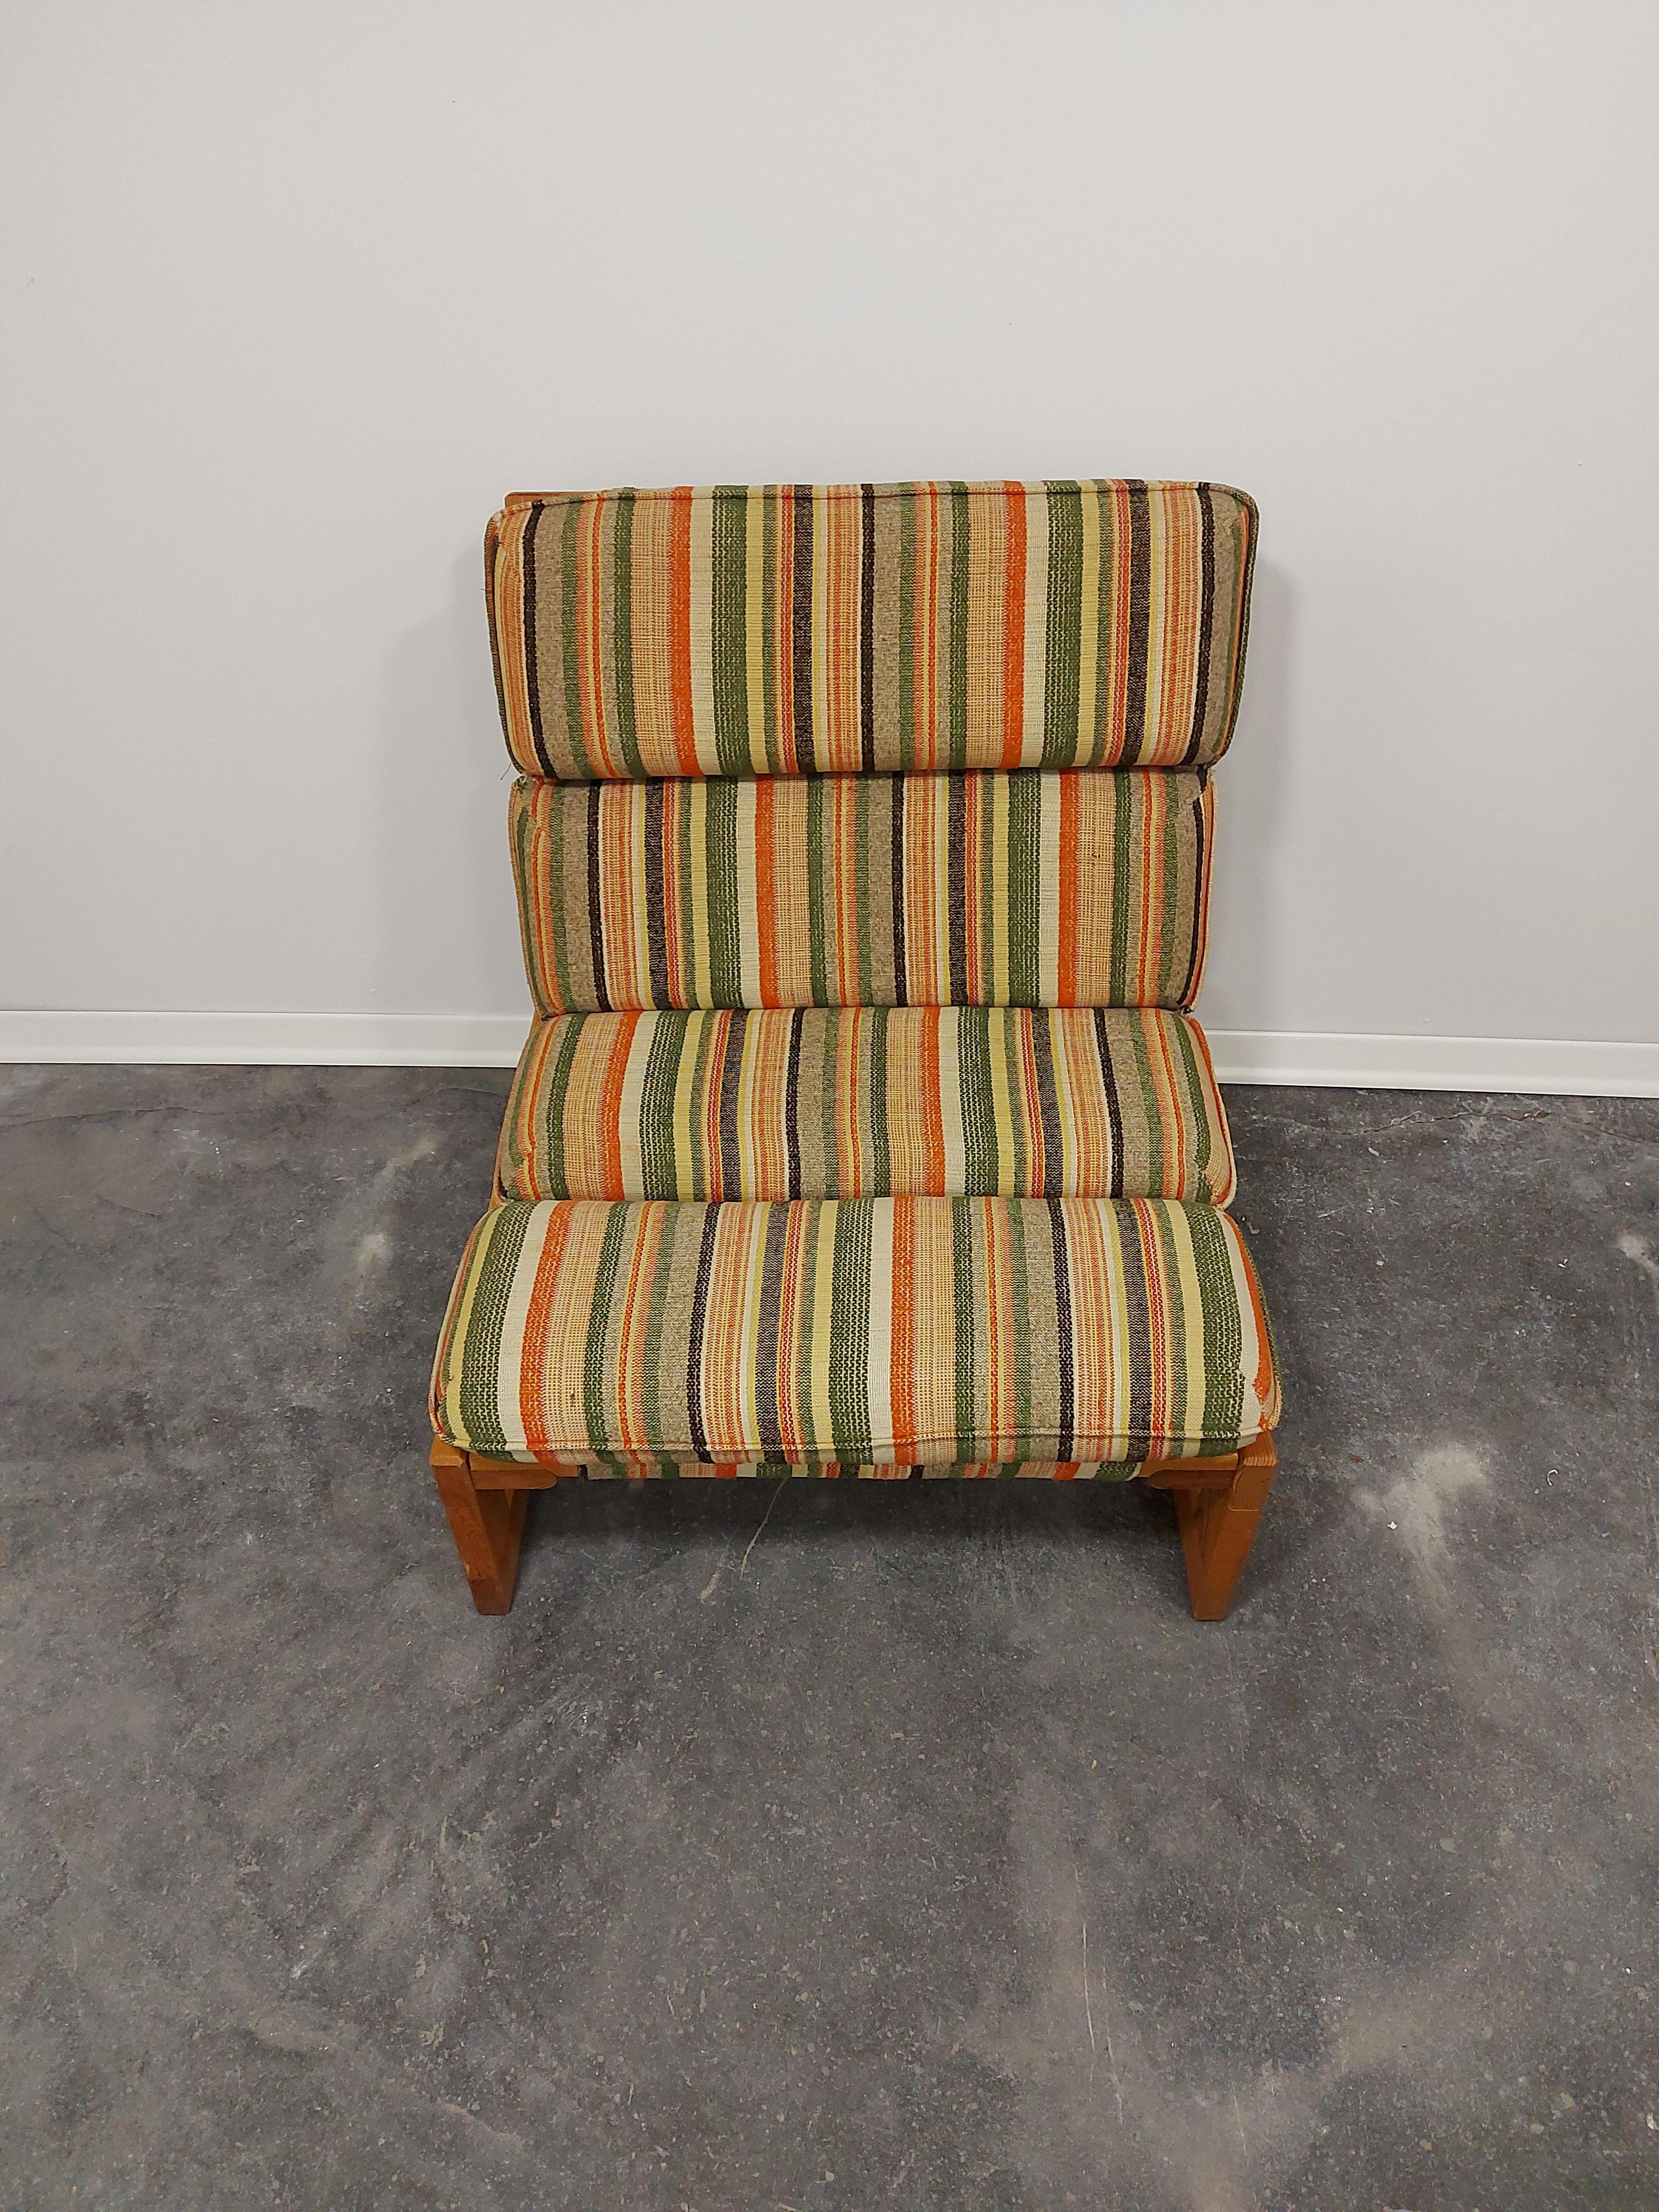 Midcentury rainbow 1, 2 or 3 seat sofa, 1970s.

Colorful fabric of all cushions is in splendid condition and cushions are removable.

The frame of the sofa is made from solid wood. This sofa is overall in a very well preserved vintage condition,